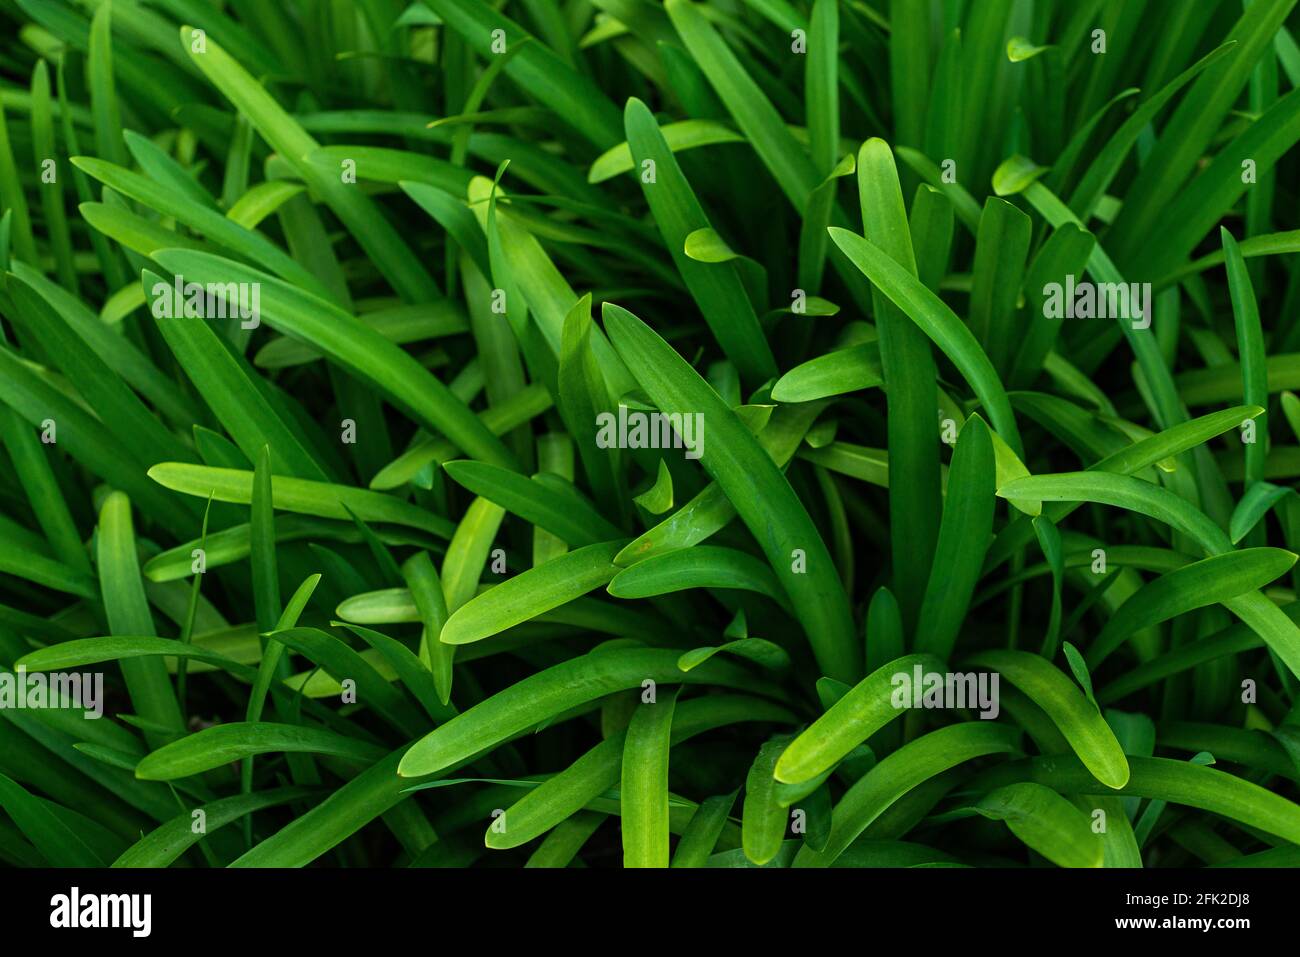 long, very green and lush leaves of a plant I know by the name of agapanthus, very common in gardens all over the world Stock Photo